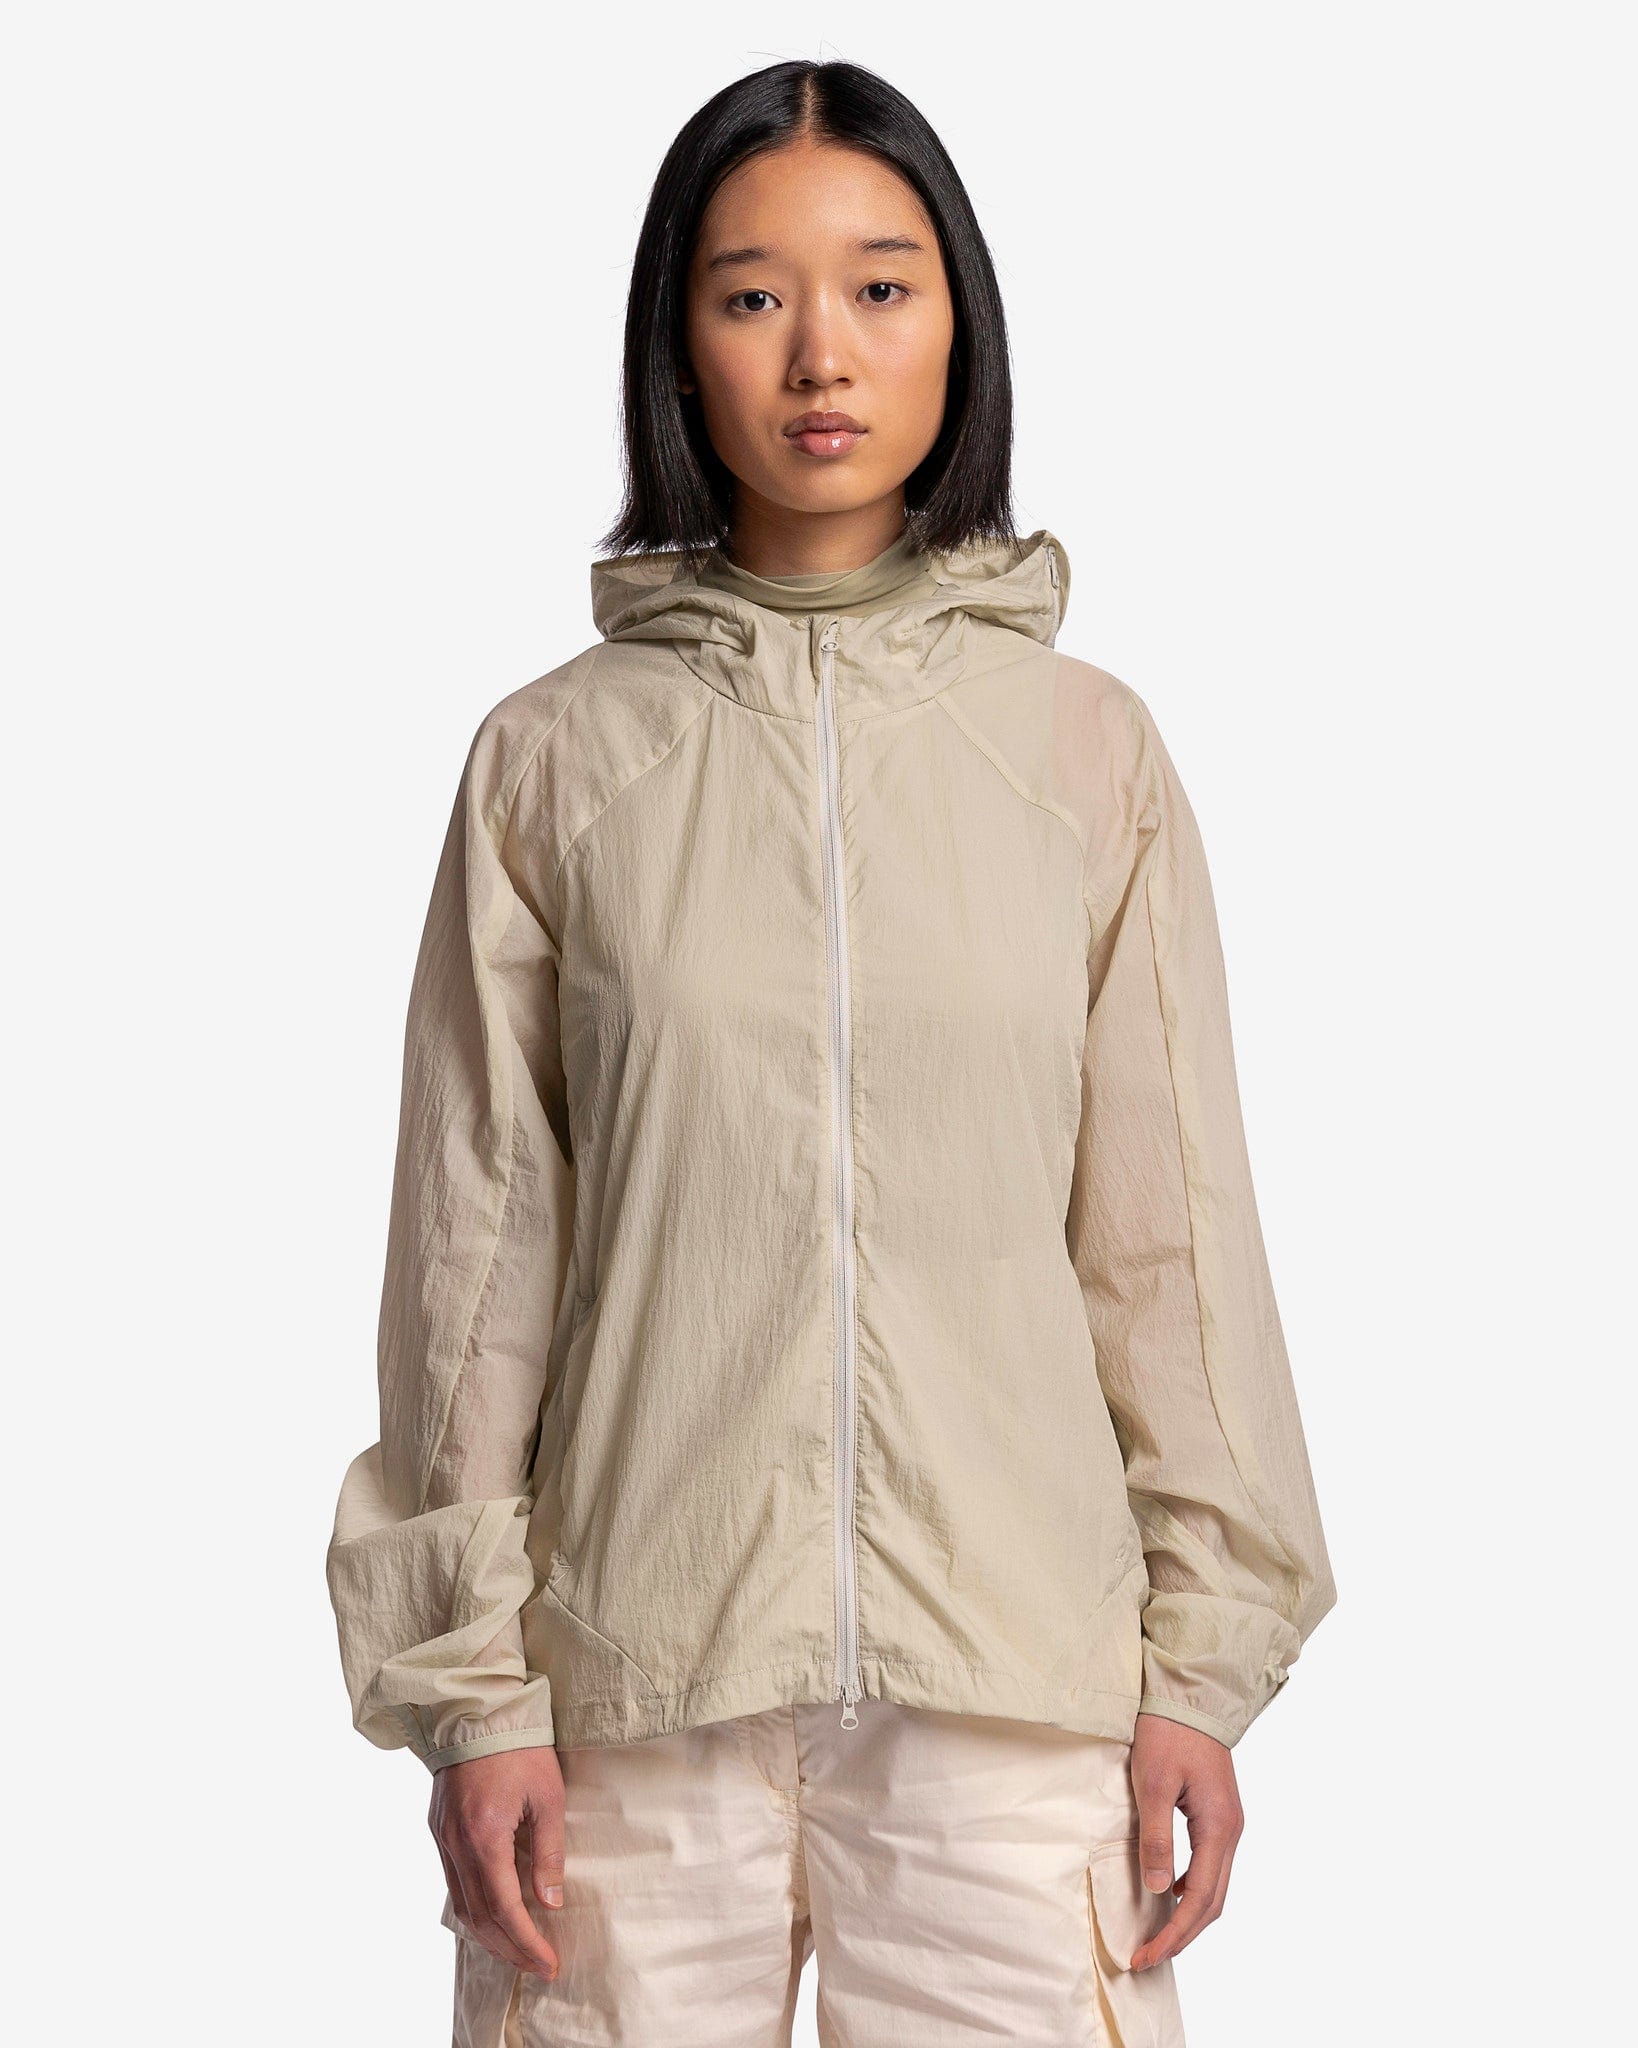 POST ARCHIVE FACTION (P.A.F) Men's Jackets Women's 5.0+ Technical Jacket Center in Grey Green